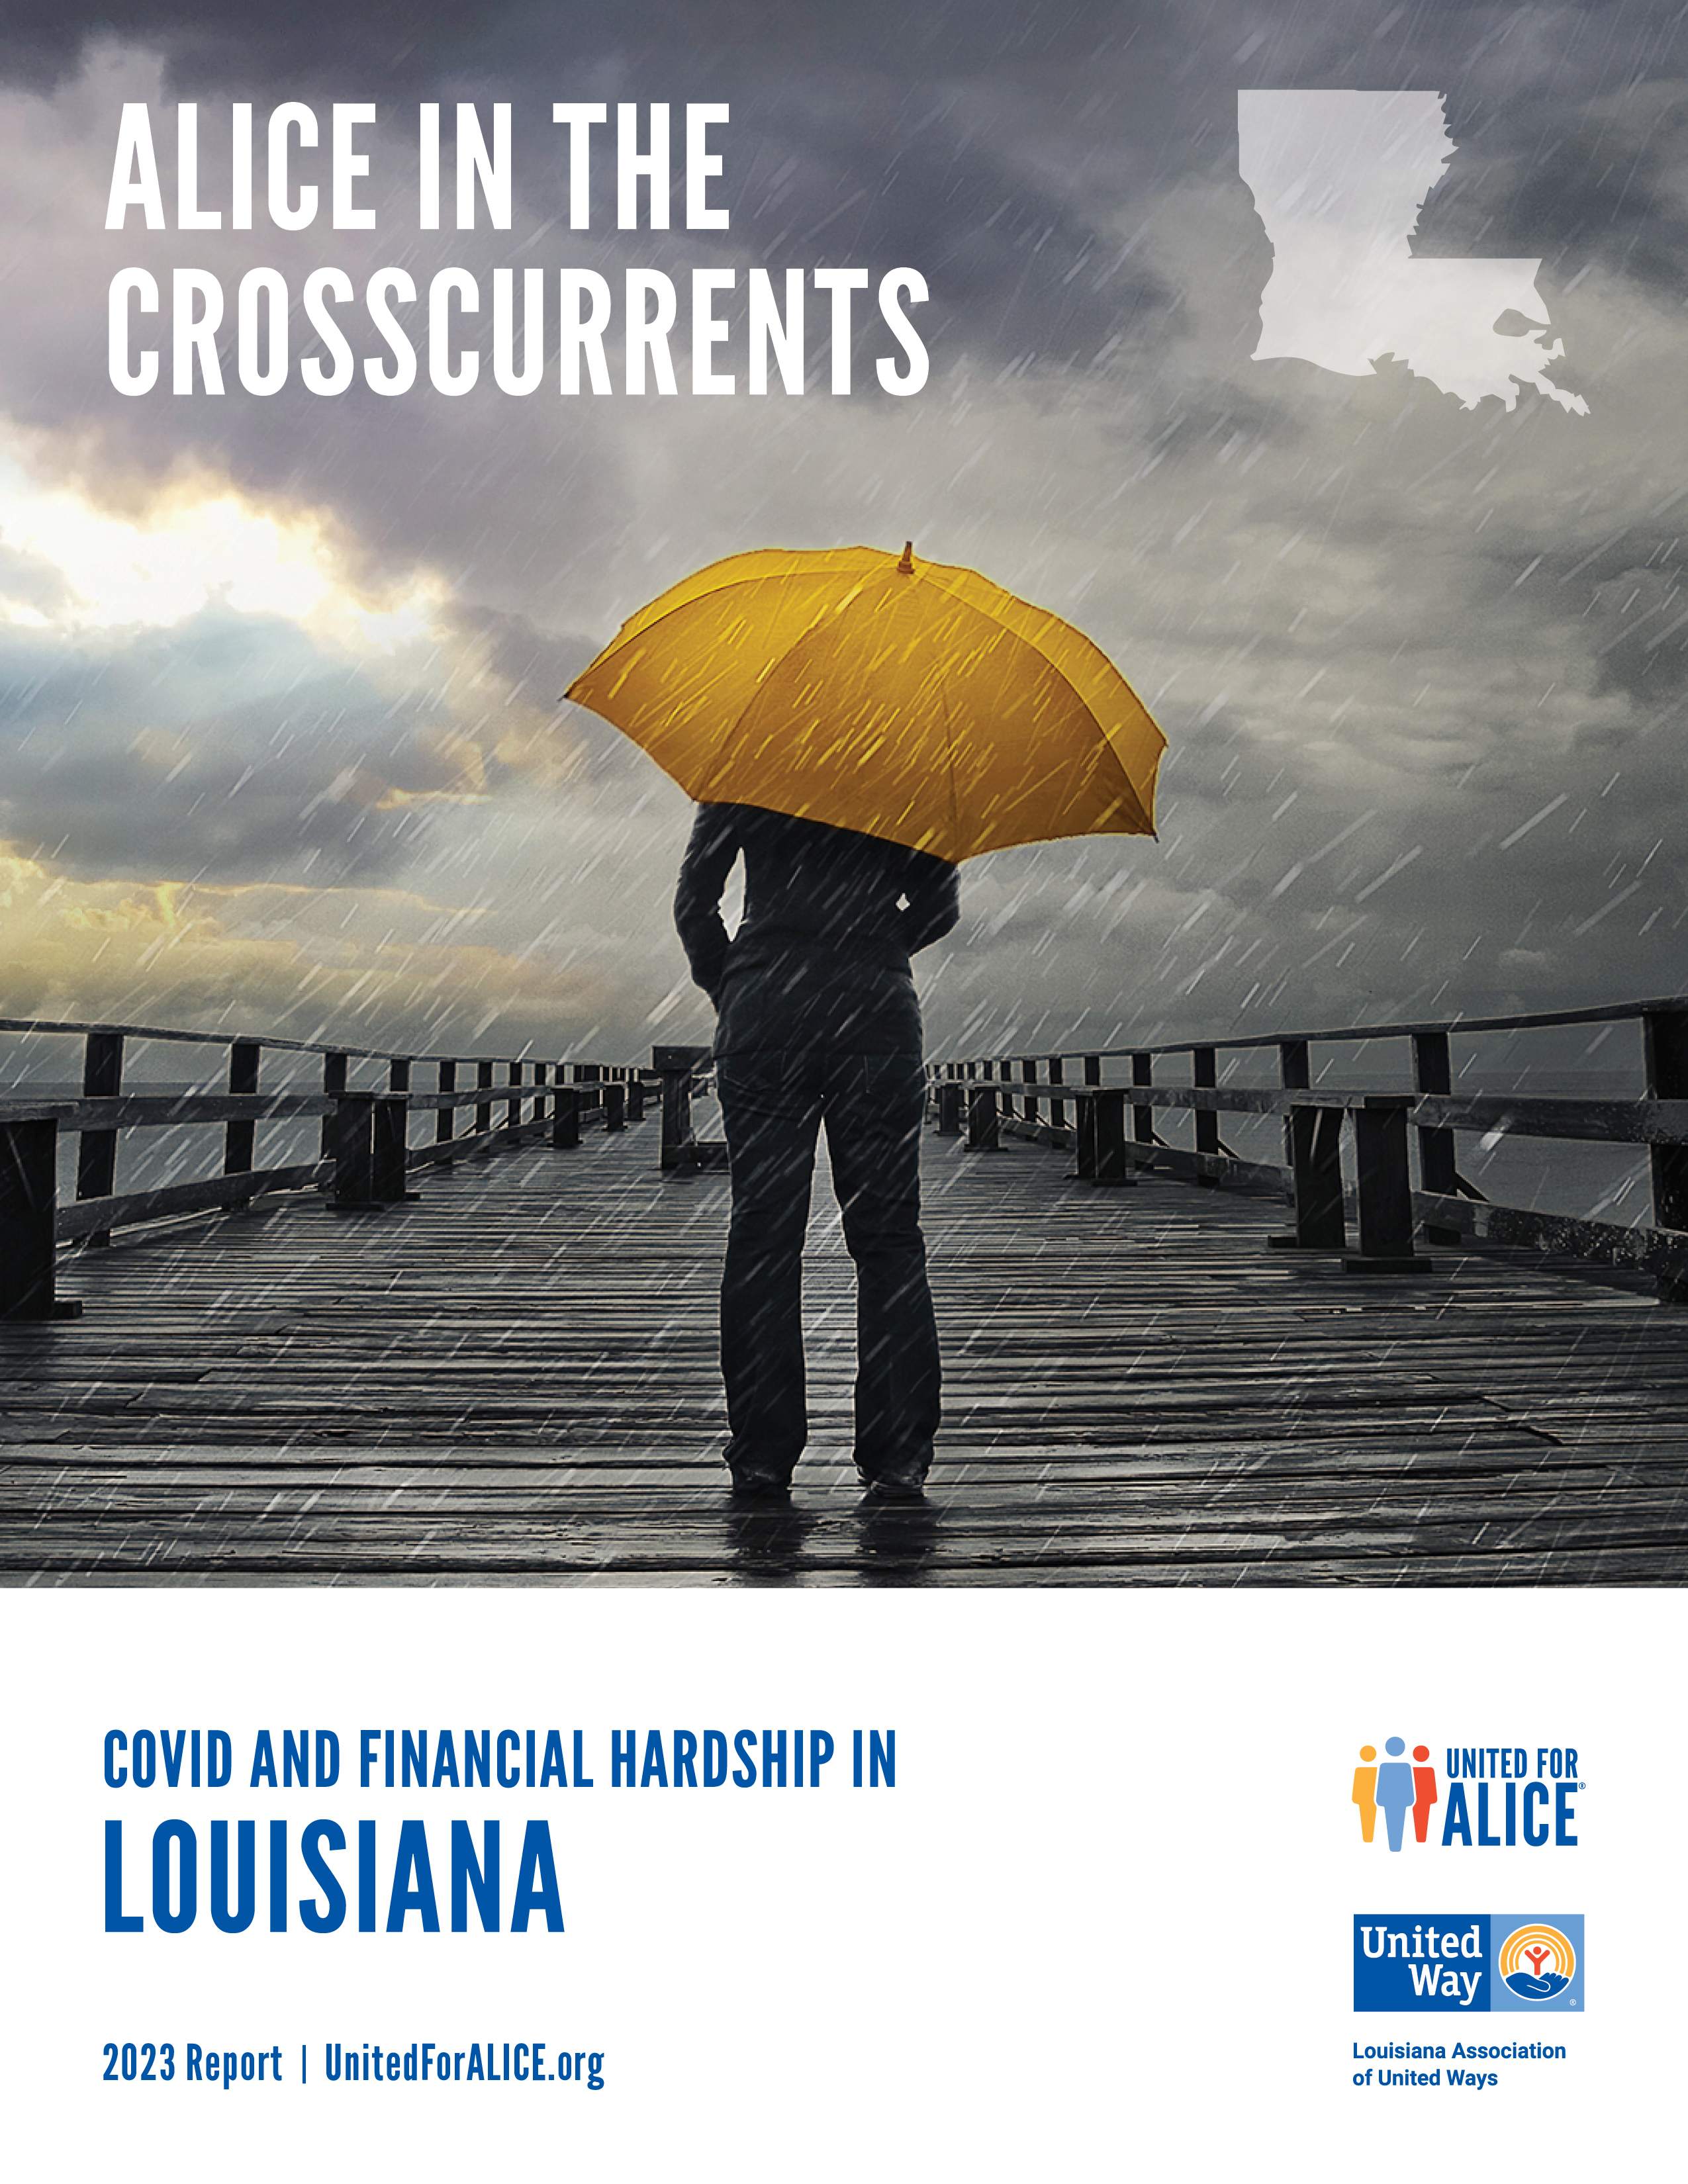 The ALICE Report-Update for Louisiana (released August 2020)